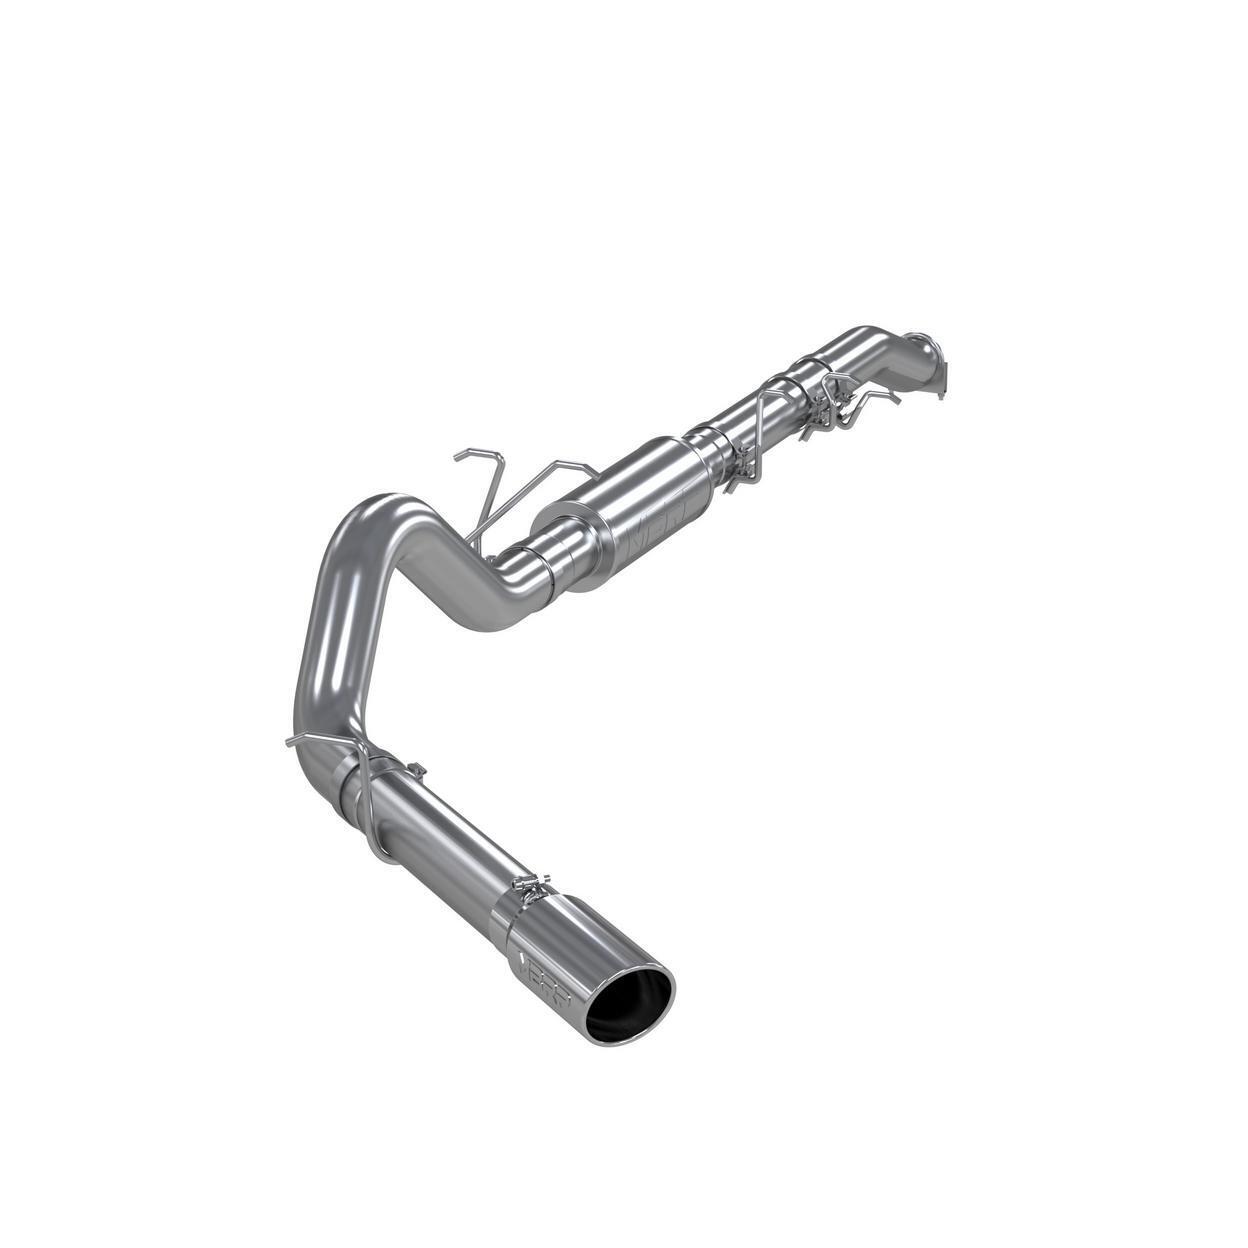 MBRP Exhaust System Kit for 2006-2007 Ford F-250 Super Duty